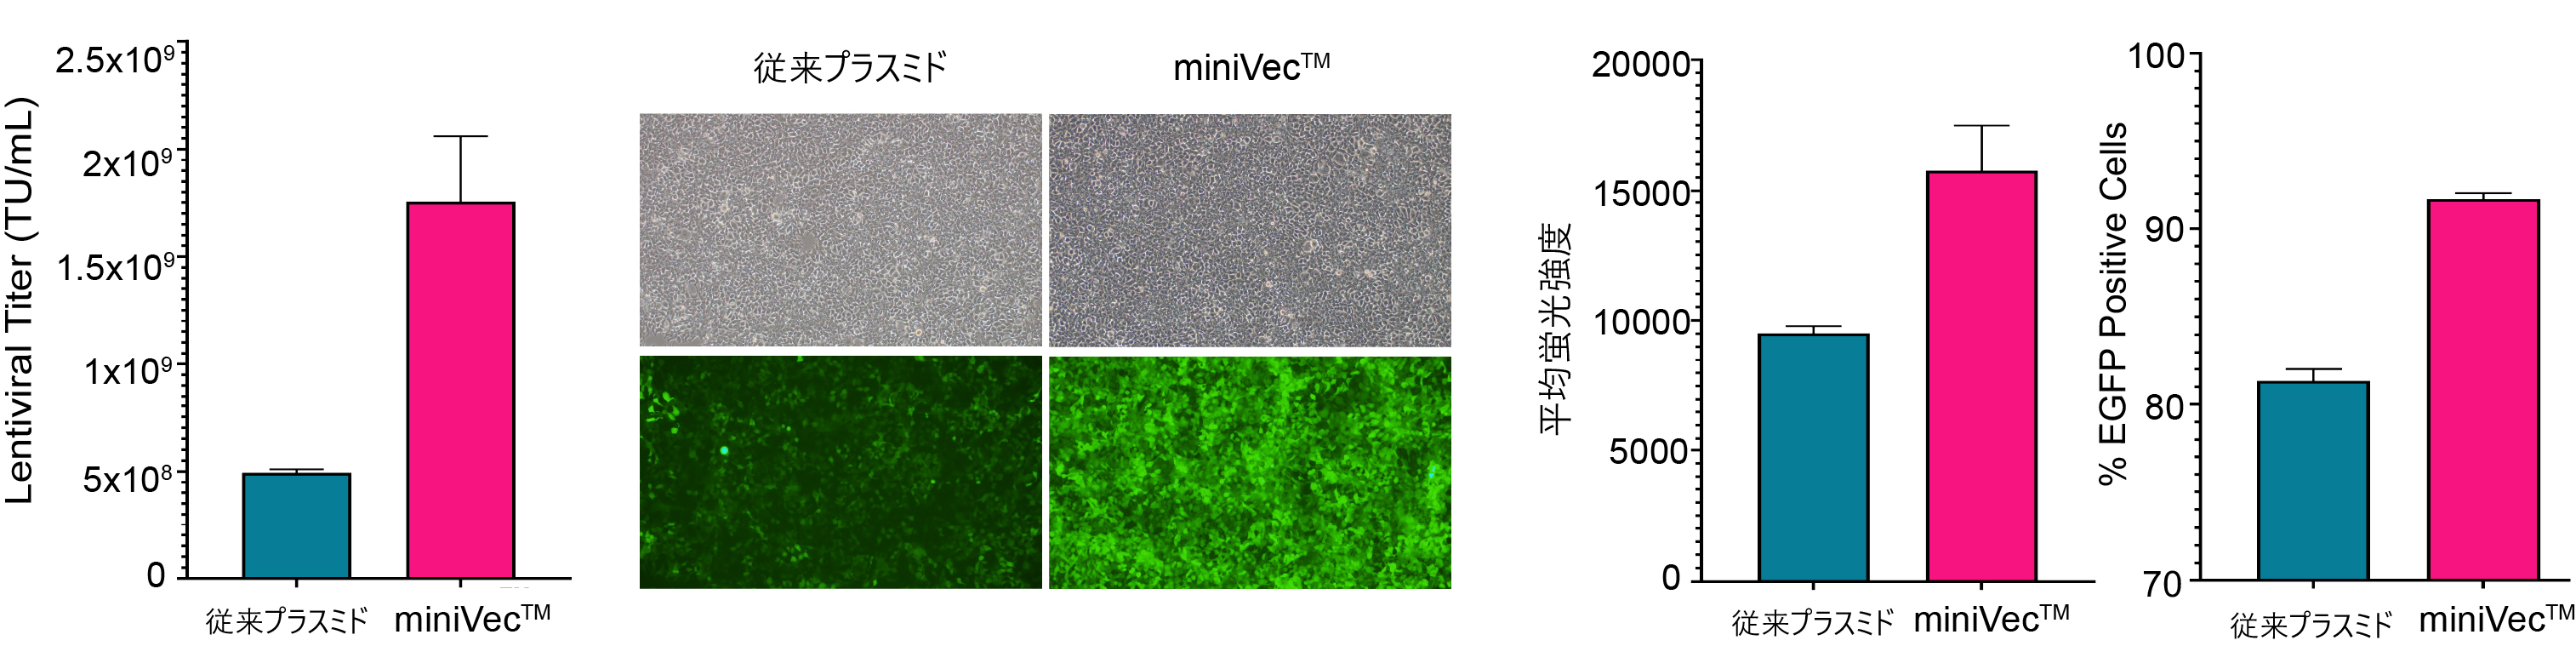 Comparison of lentivirus packaging using traditional and miniVec™ plasmids